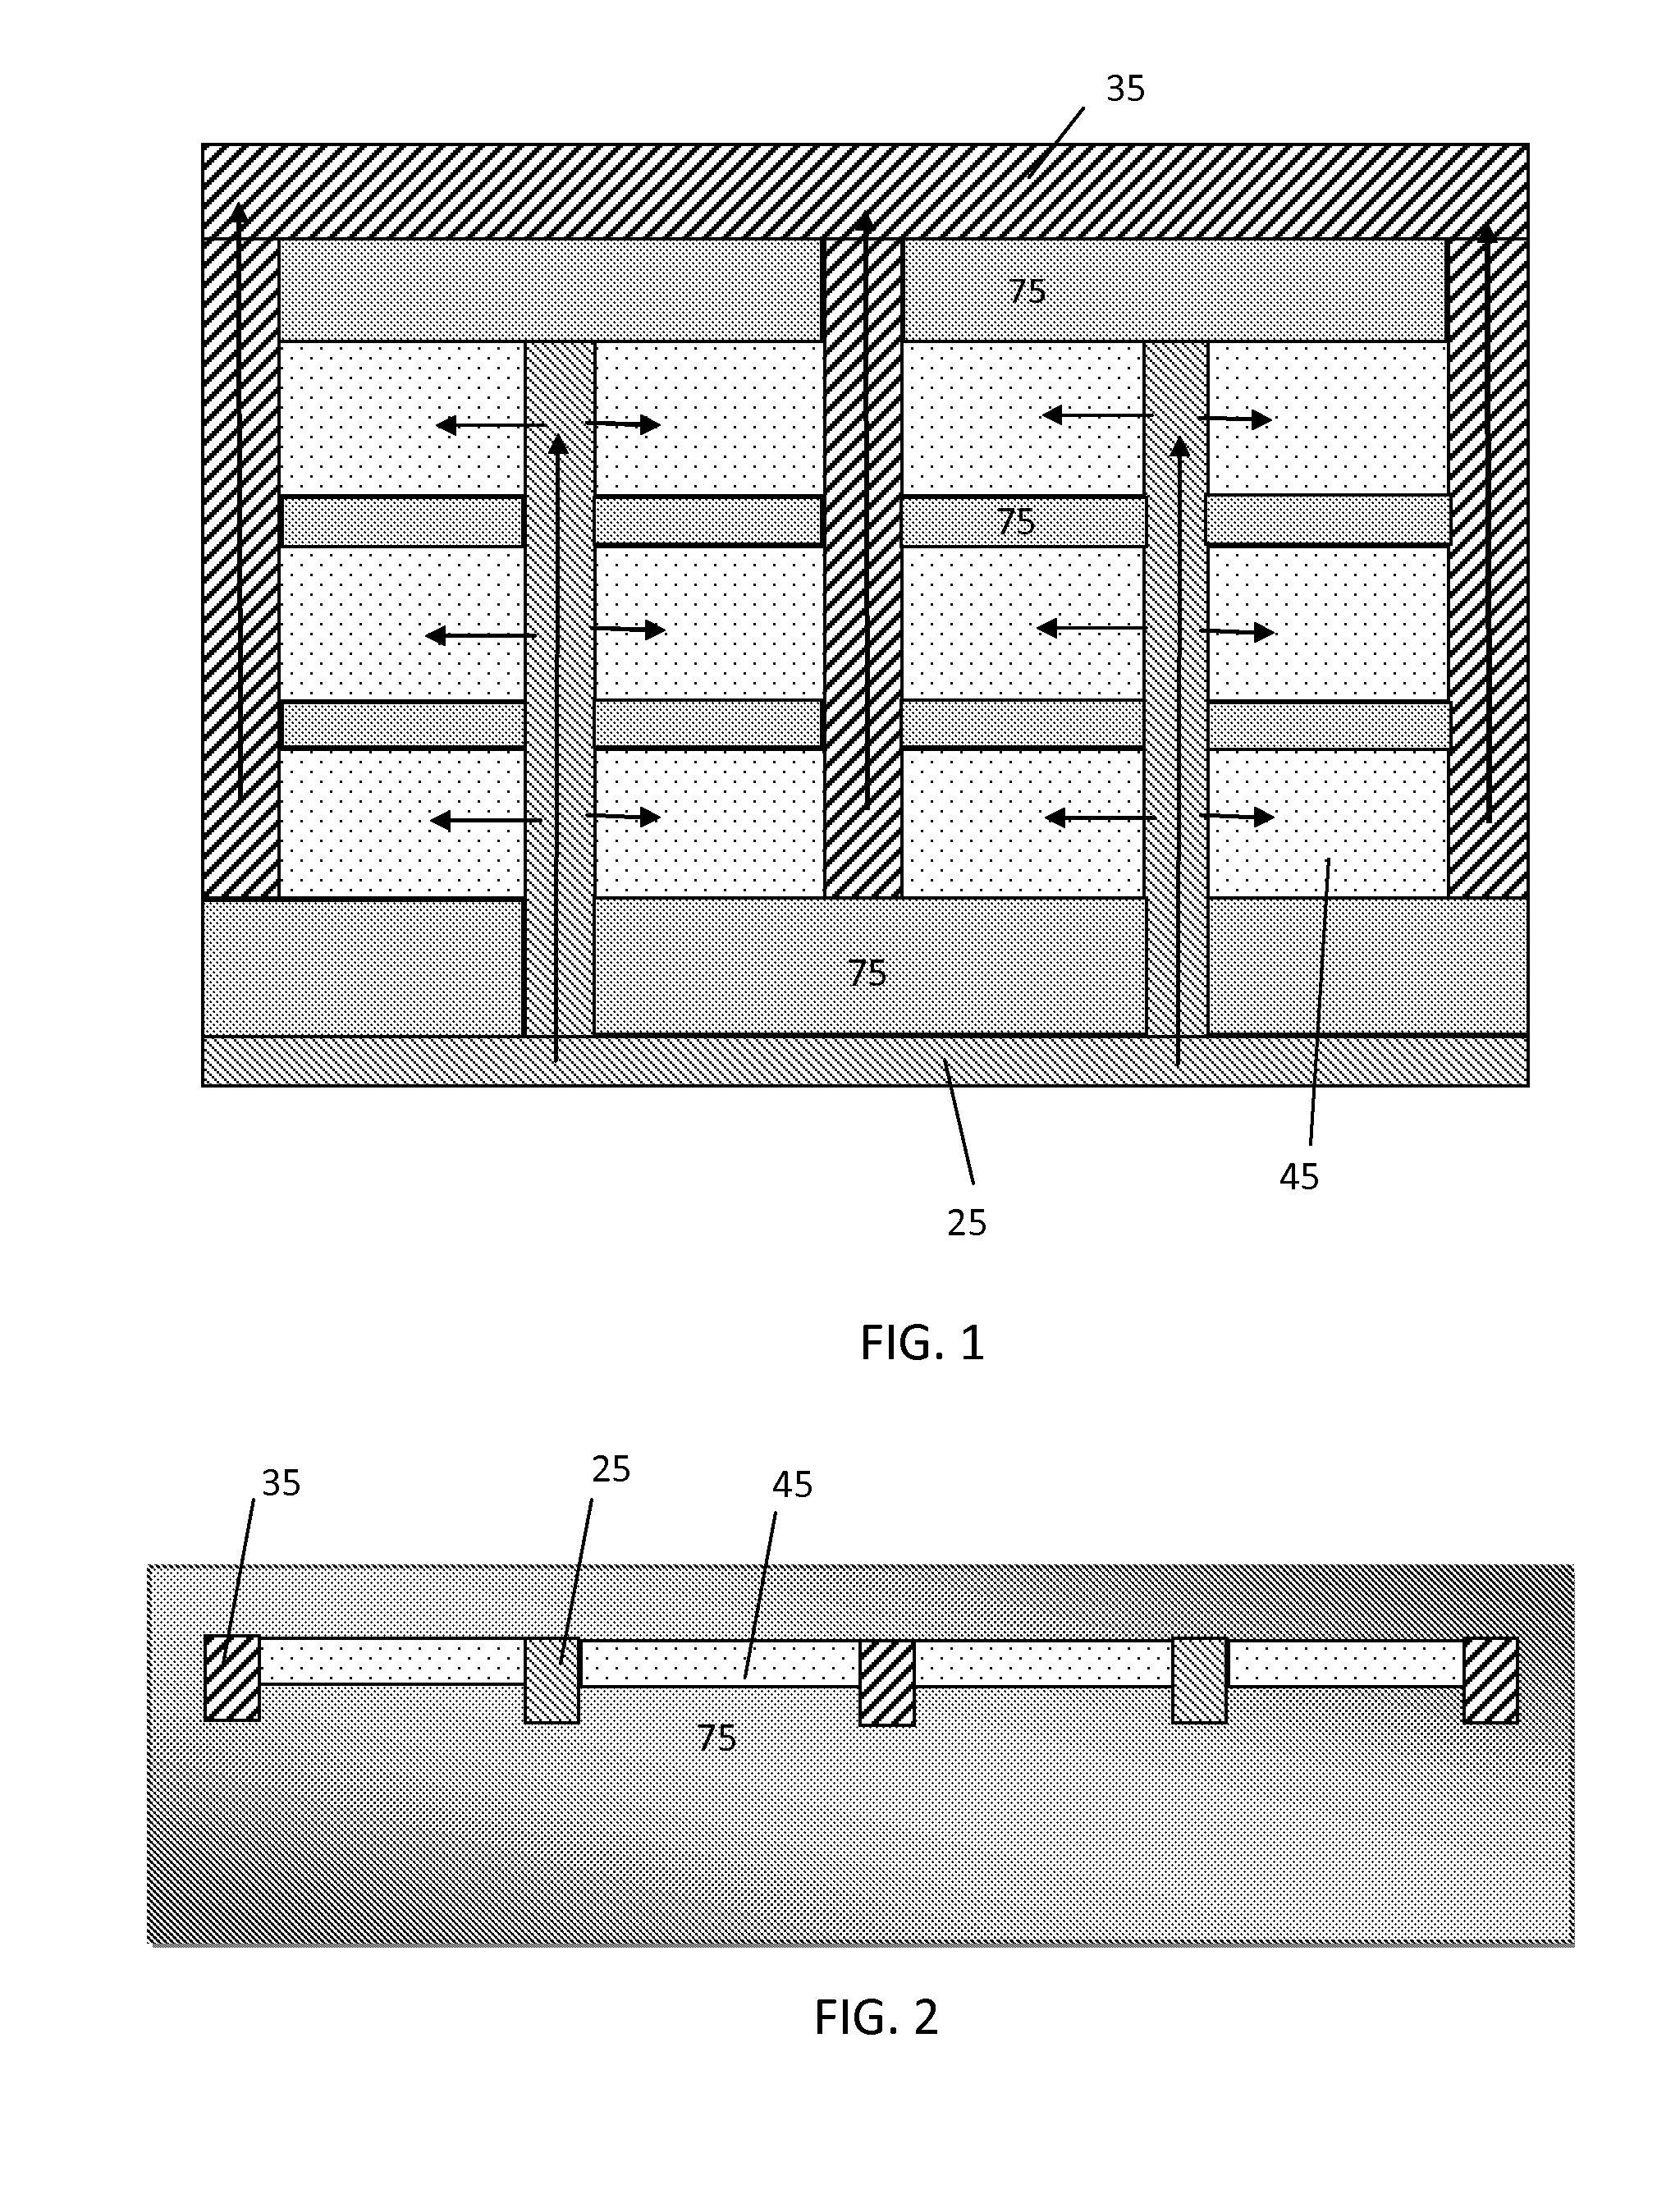 Preparation of thin layers of a fluid containing cells for analysis